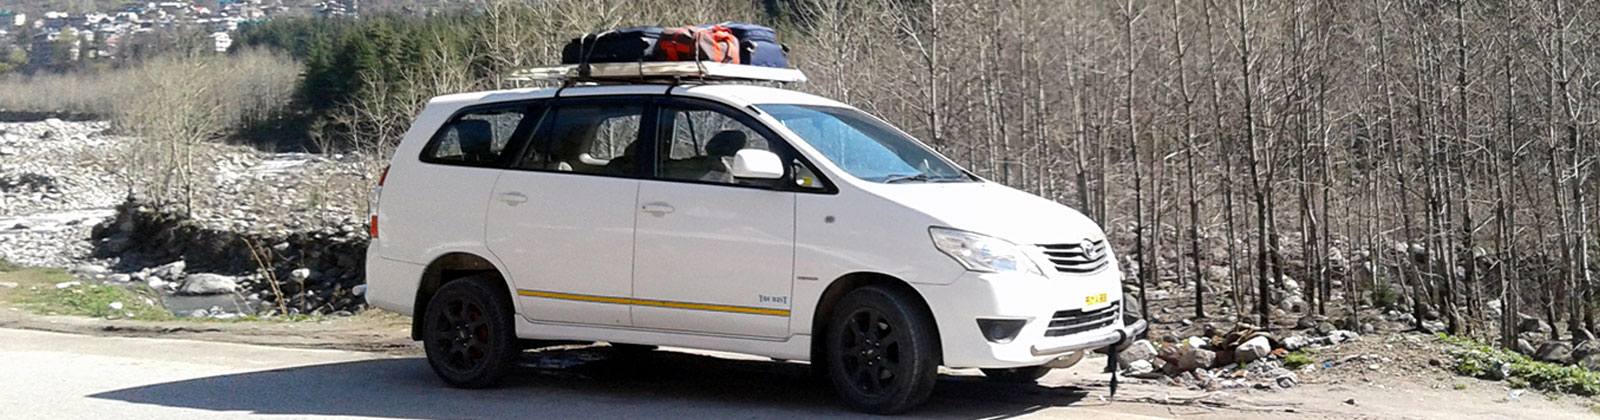 manali local taxi rates,manali local sightseeing taxi rates,manali local sightseeing taxi fare,manali taxi service reviews,local cab service in manali,manali local sightseeing bus,manali local sightseeing places